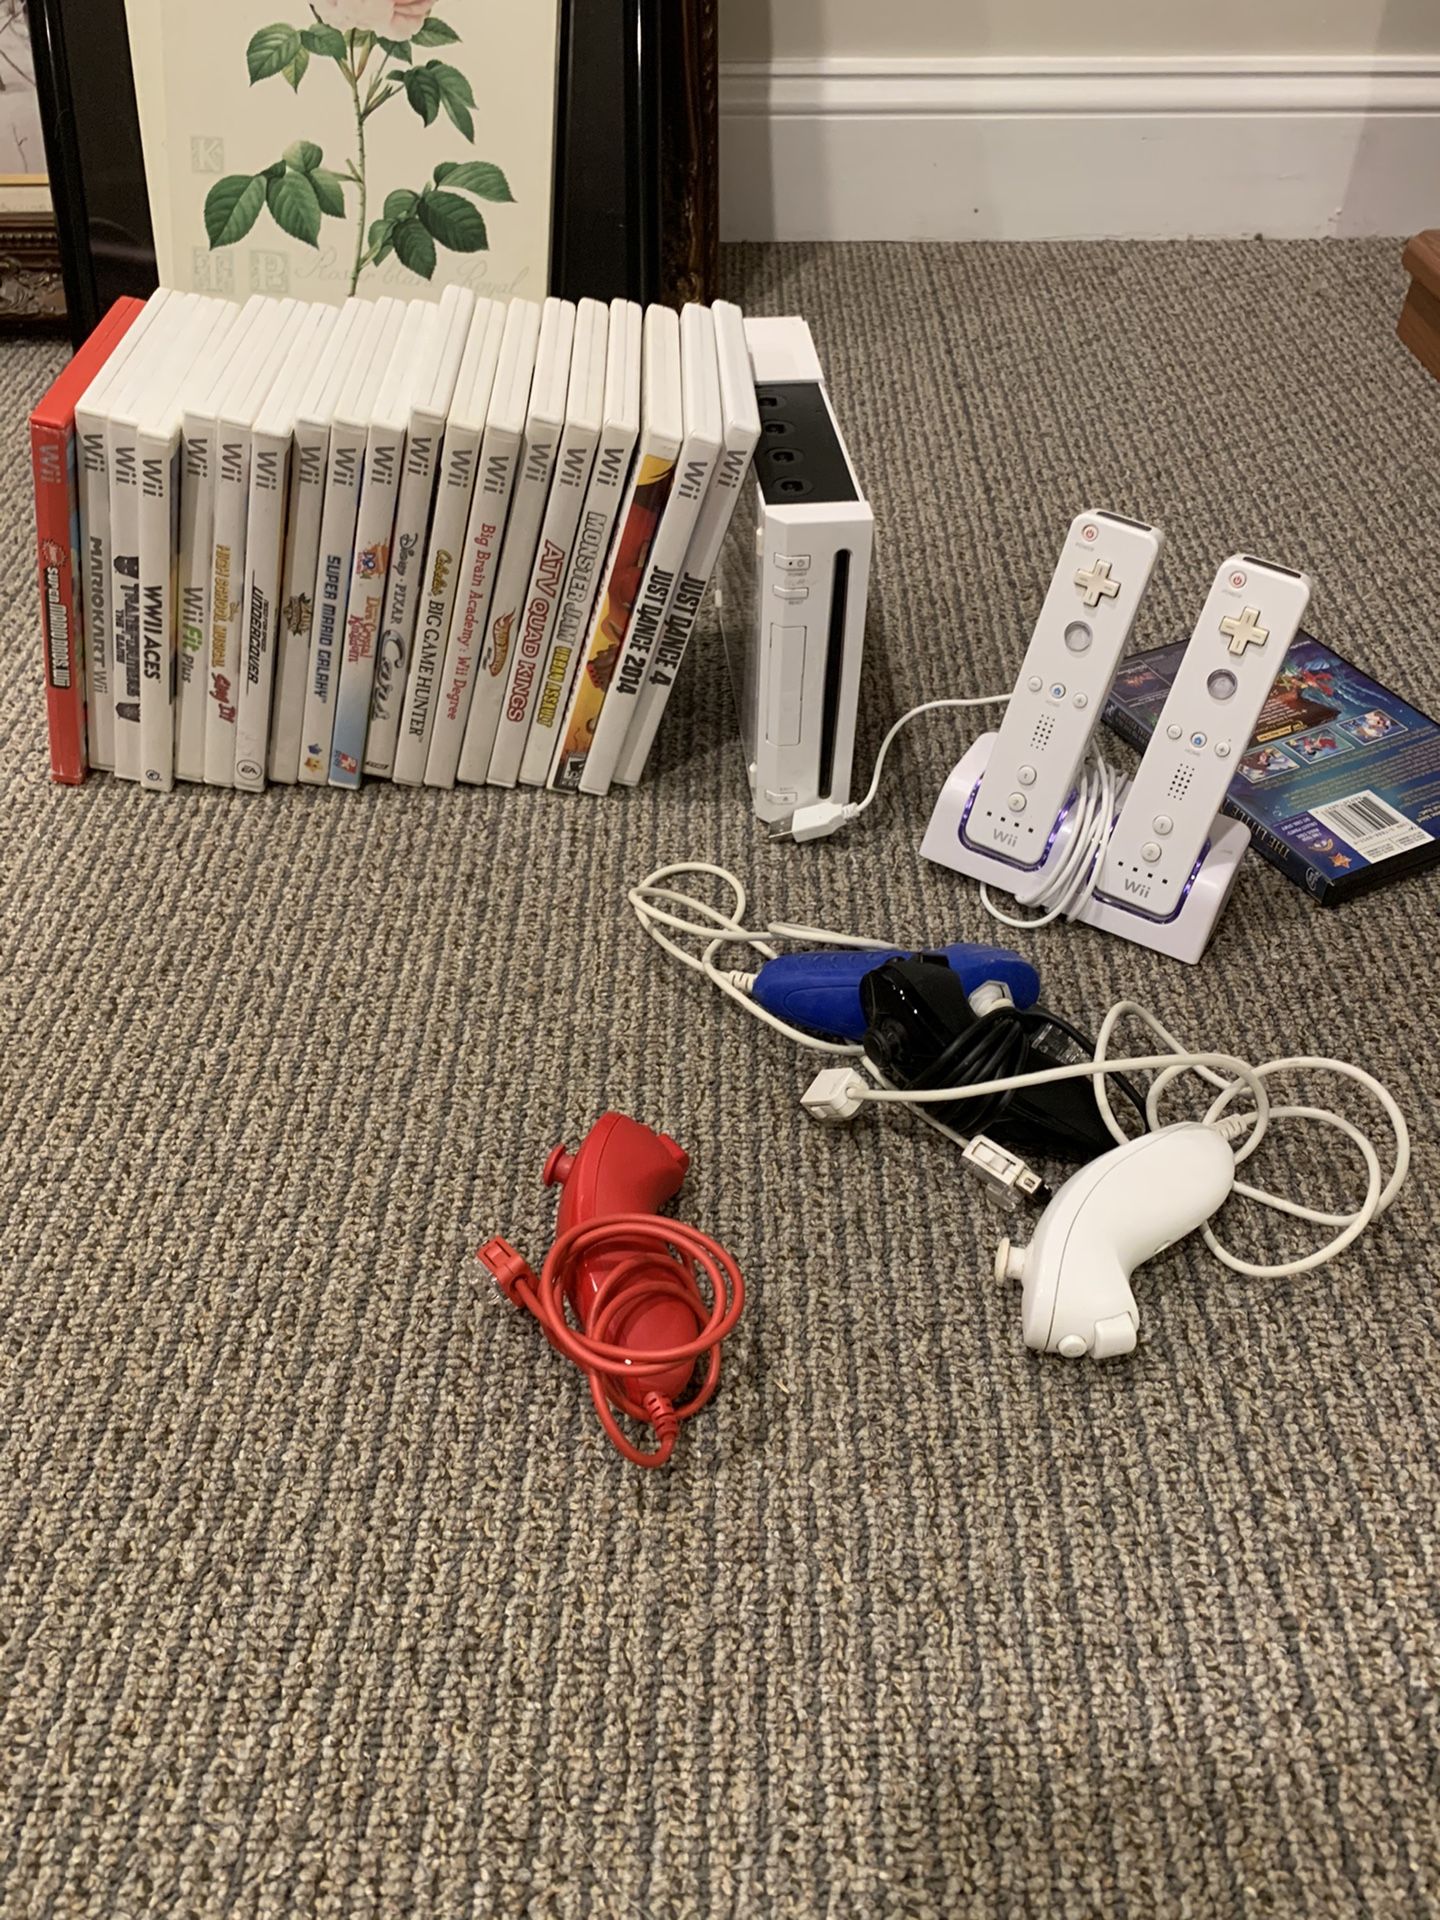 Wii with many games